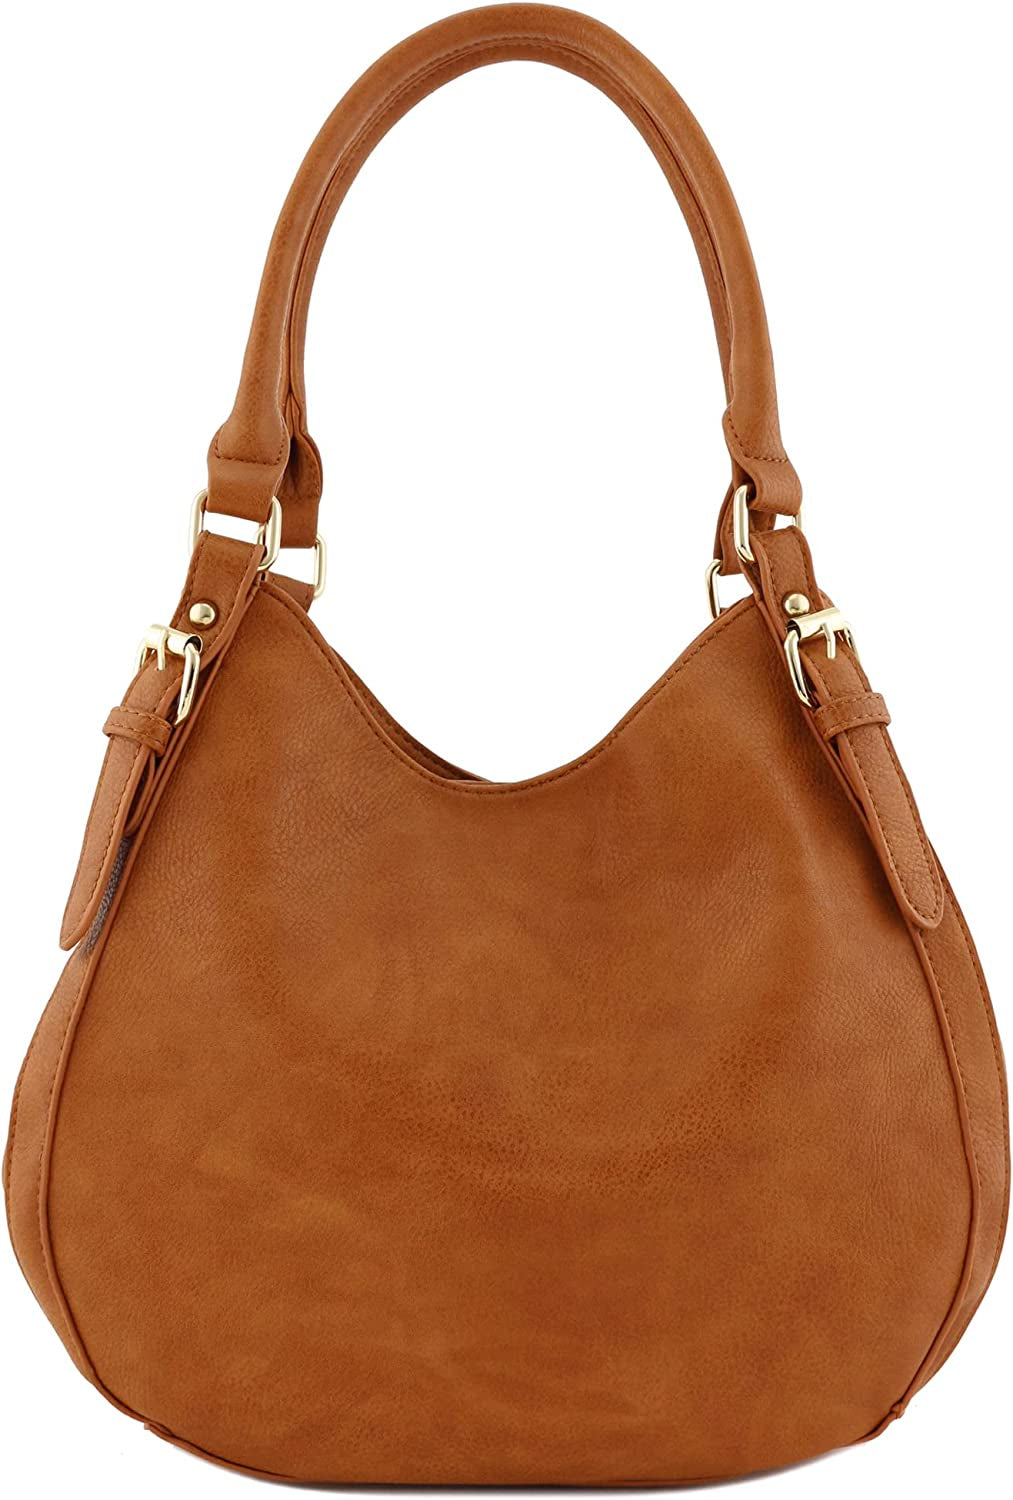 Light-Weight 3 Compartment Faux Leather Medium Hobo Bag